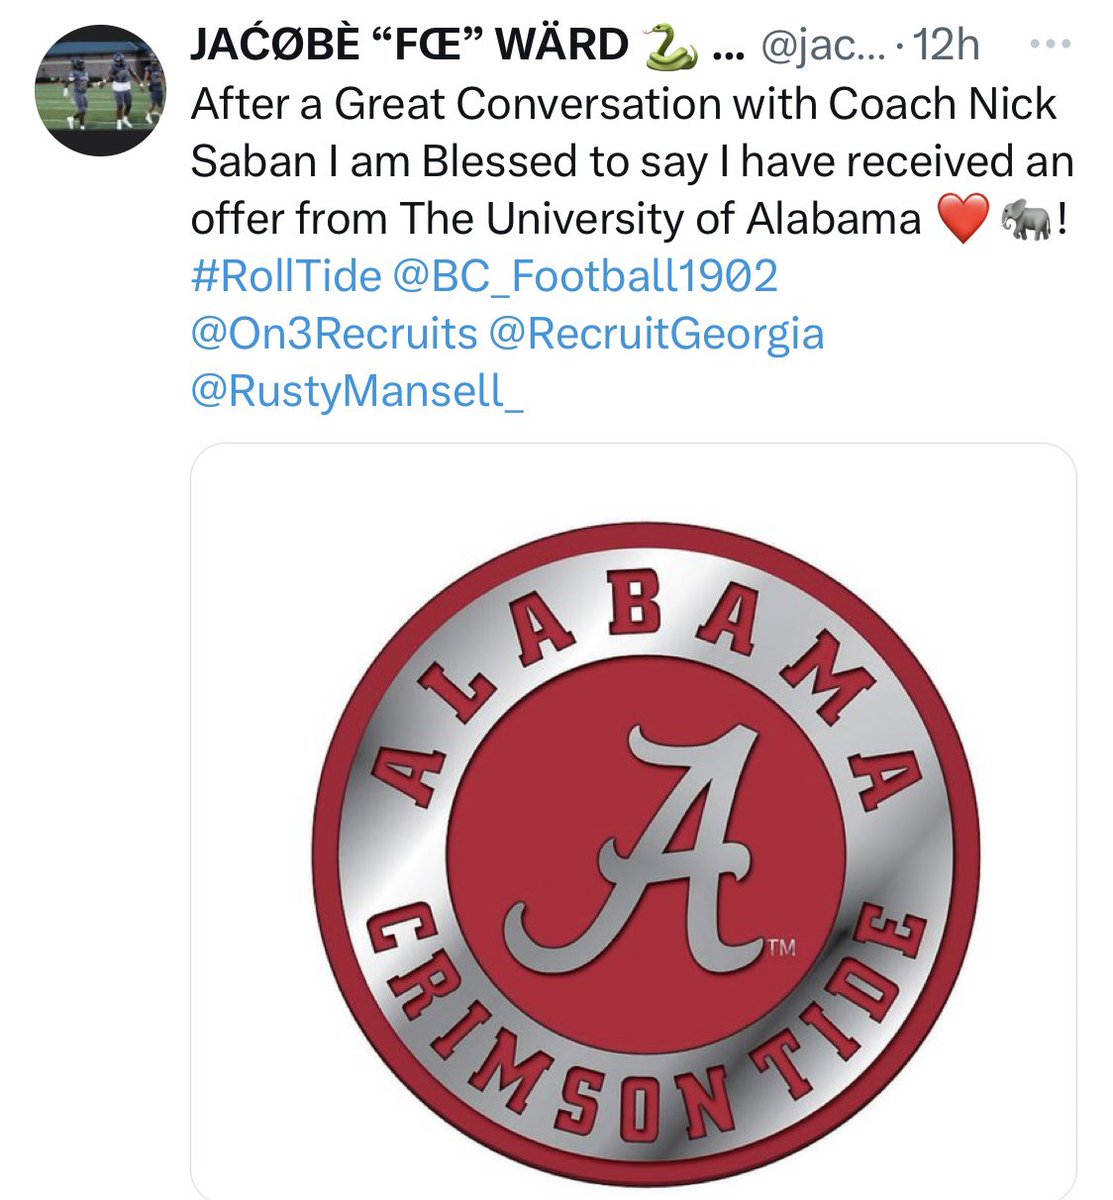 Congratulations to Benedictine Military School’s Jacobe Ward, who has received a college scholarship offer from Coach Nick Saban and the University of Alabama Crimson Tide to continue his academic and athletic (football) career! #thebc400 #NextLevelBC #Savannah @jacobe_ward